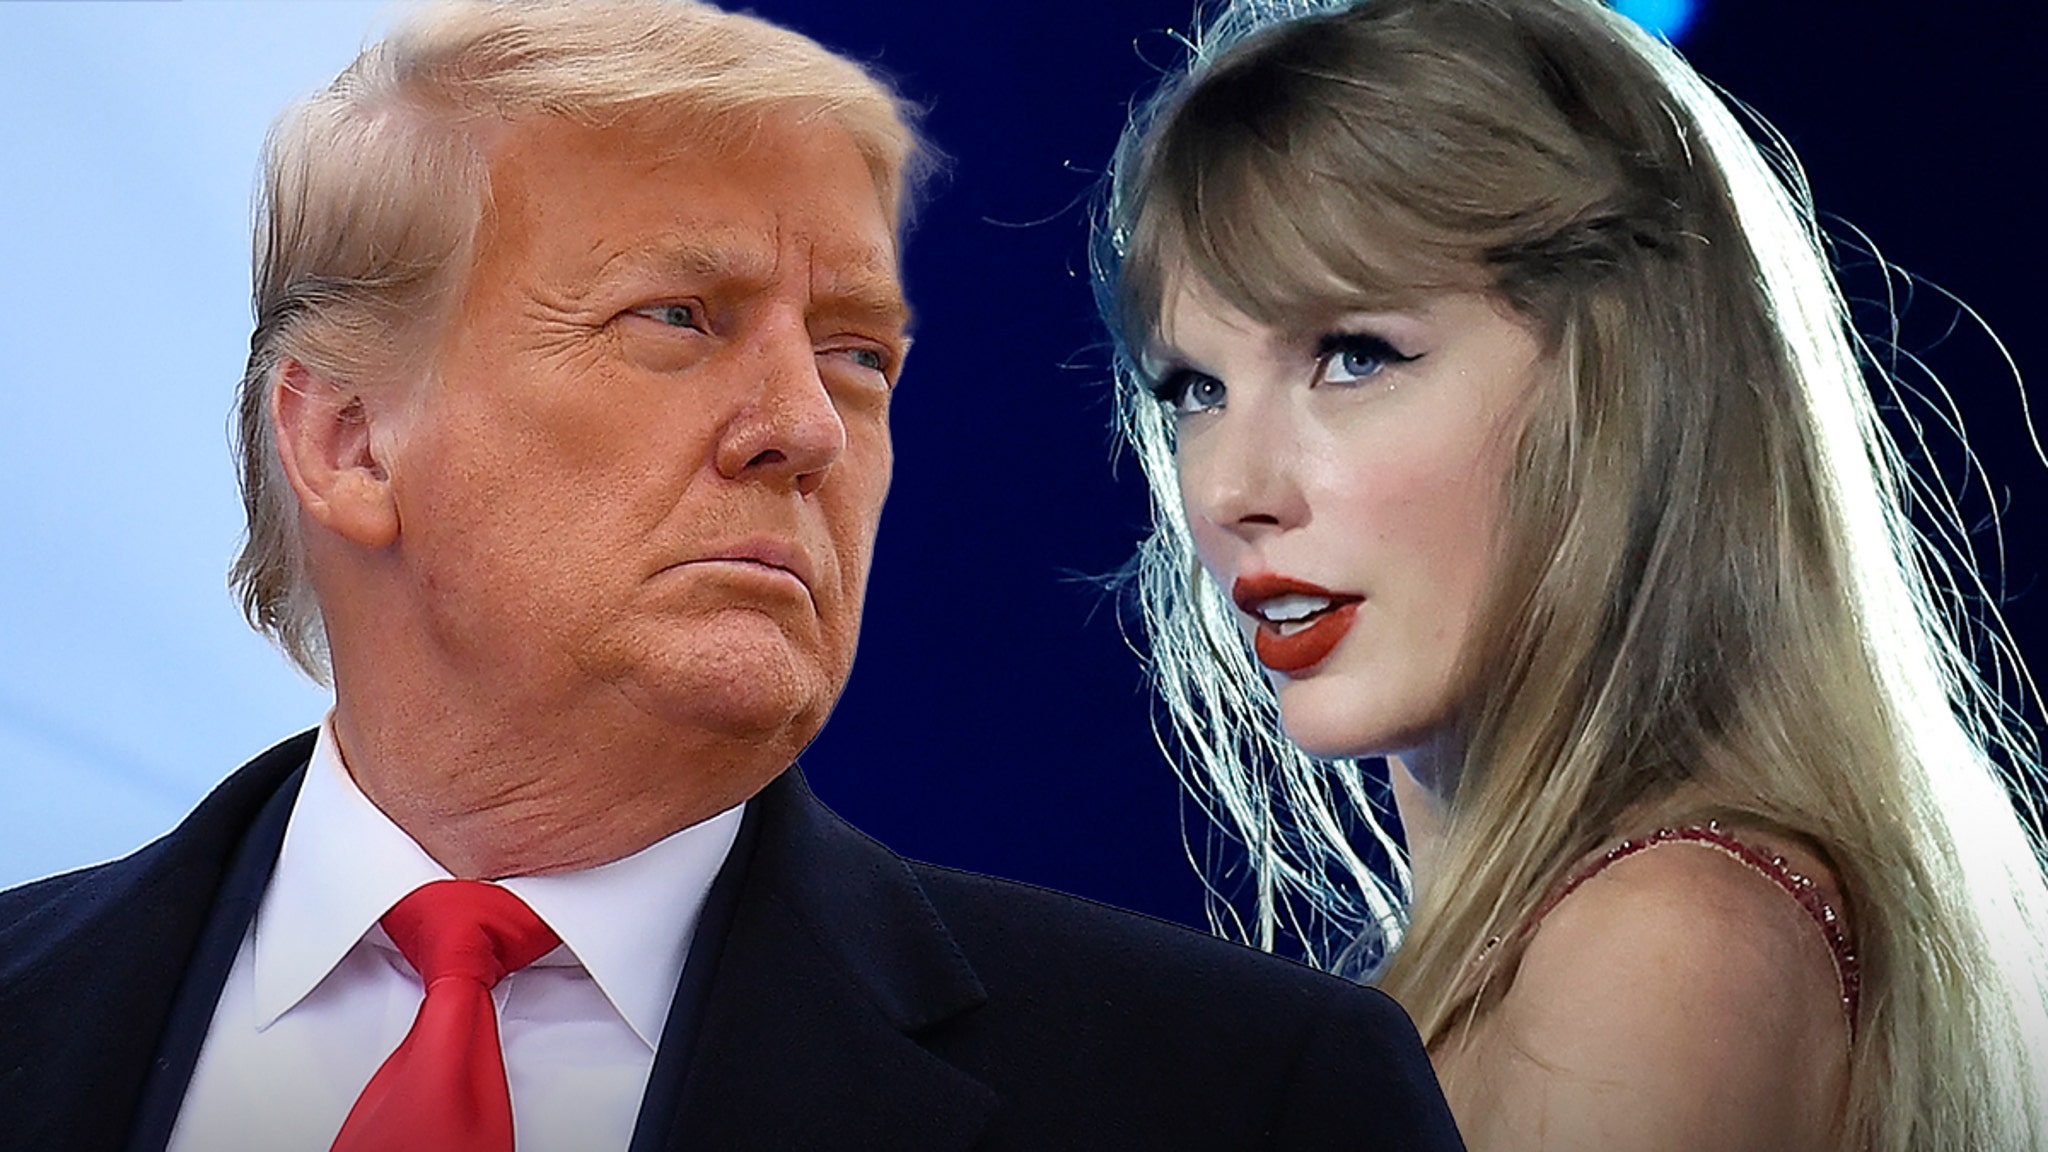 Trump Aides Vow to Wage ‘Holy War’ on Taylor Swift Amid Endorsement Talks